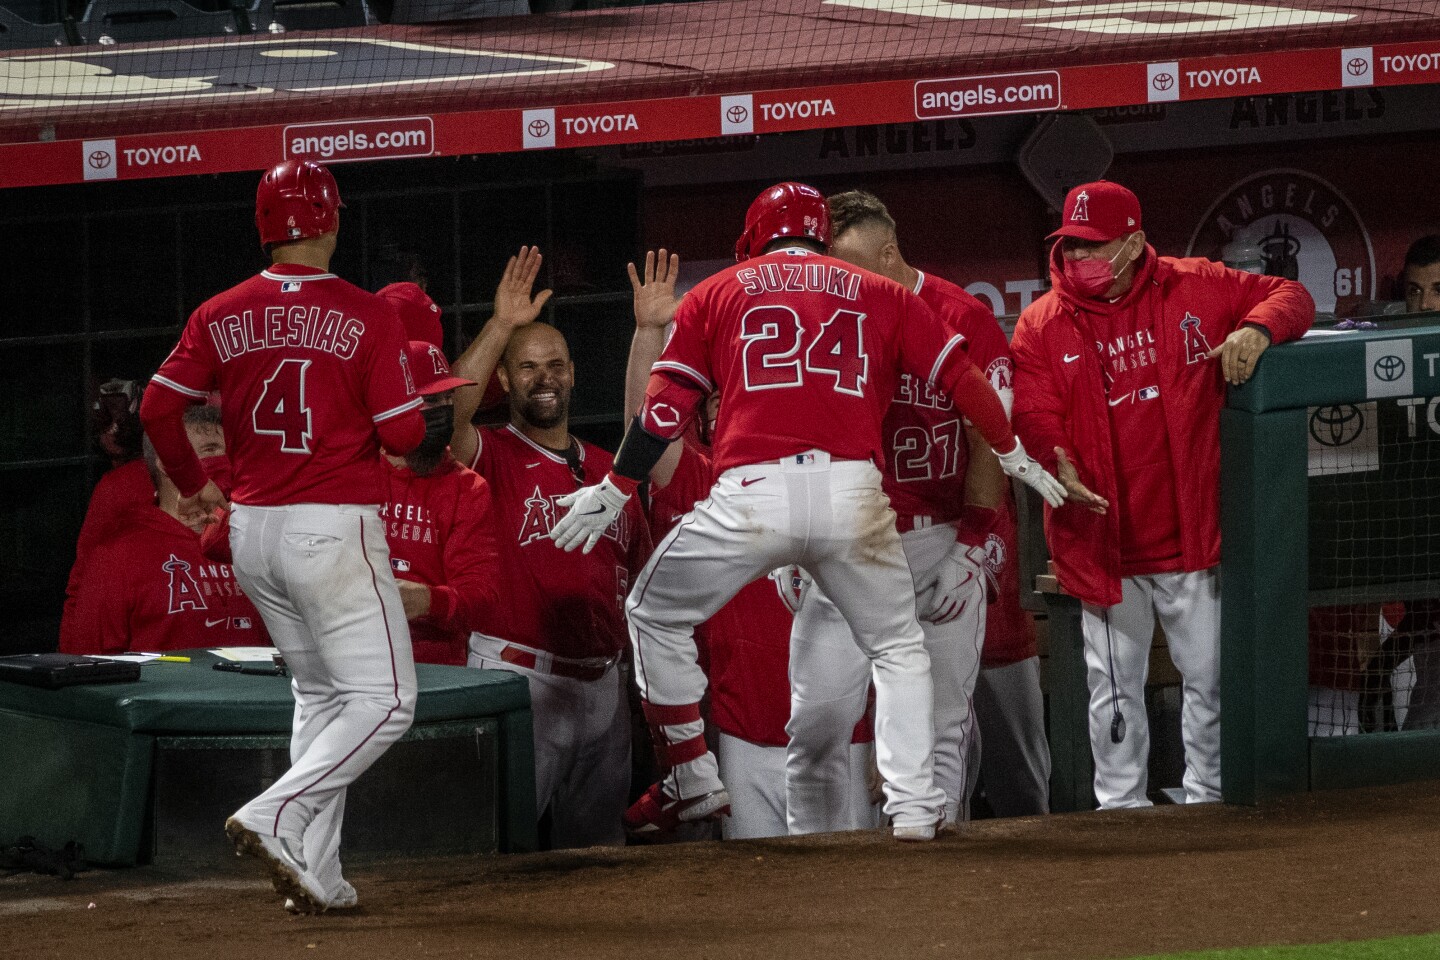 Angels vs. Texas Rangers Latest news from the AL West series Los